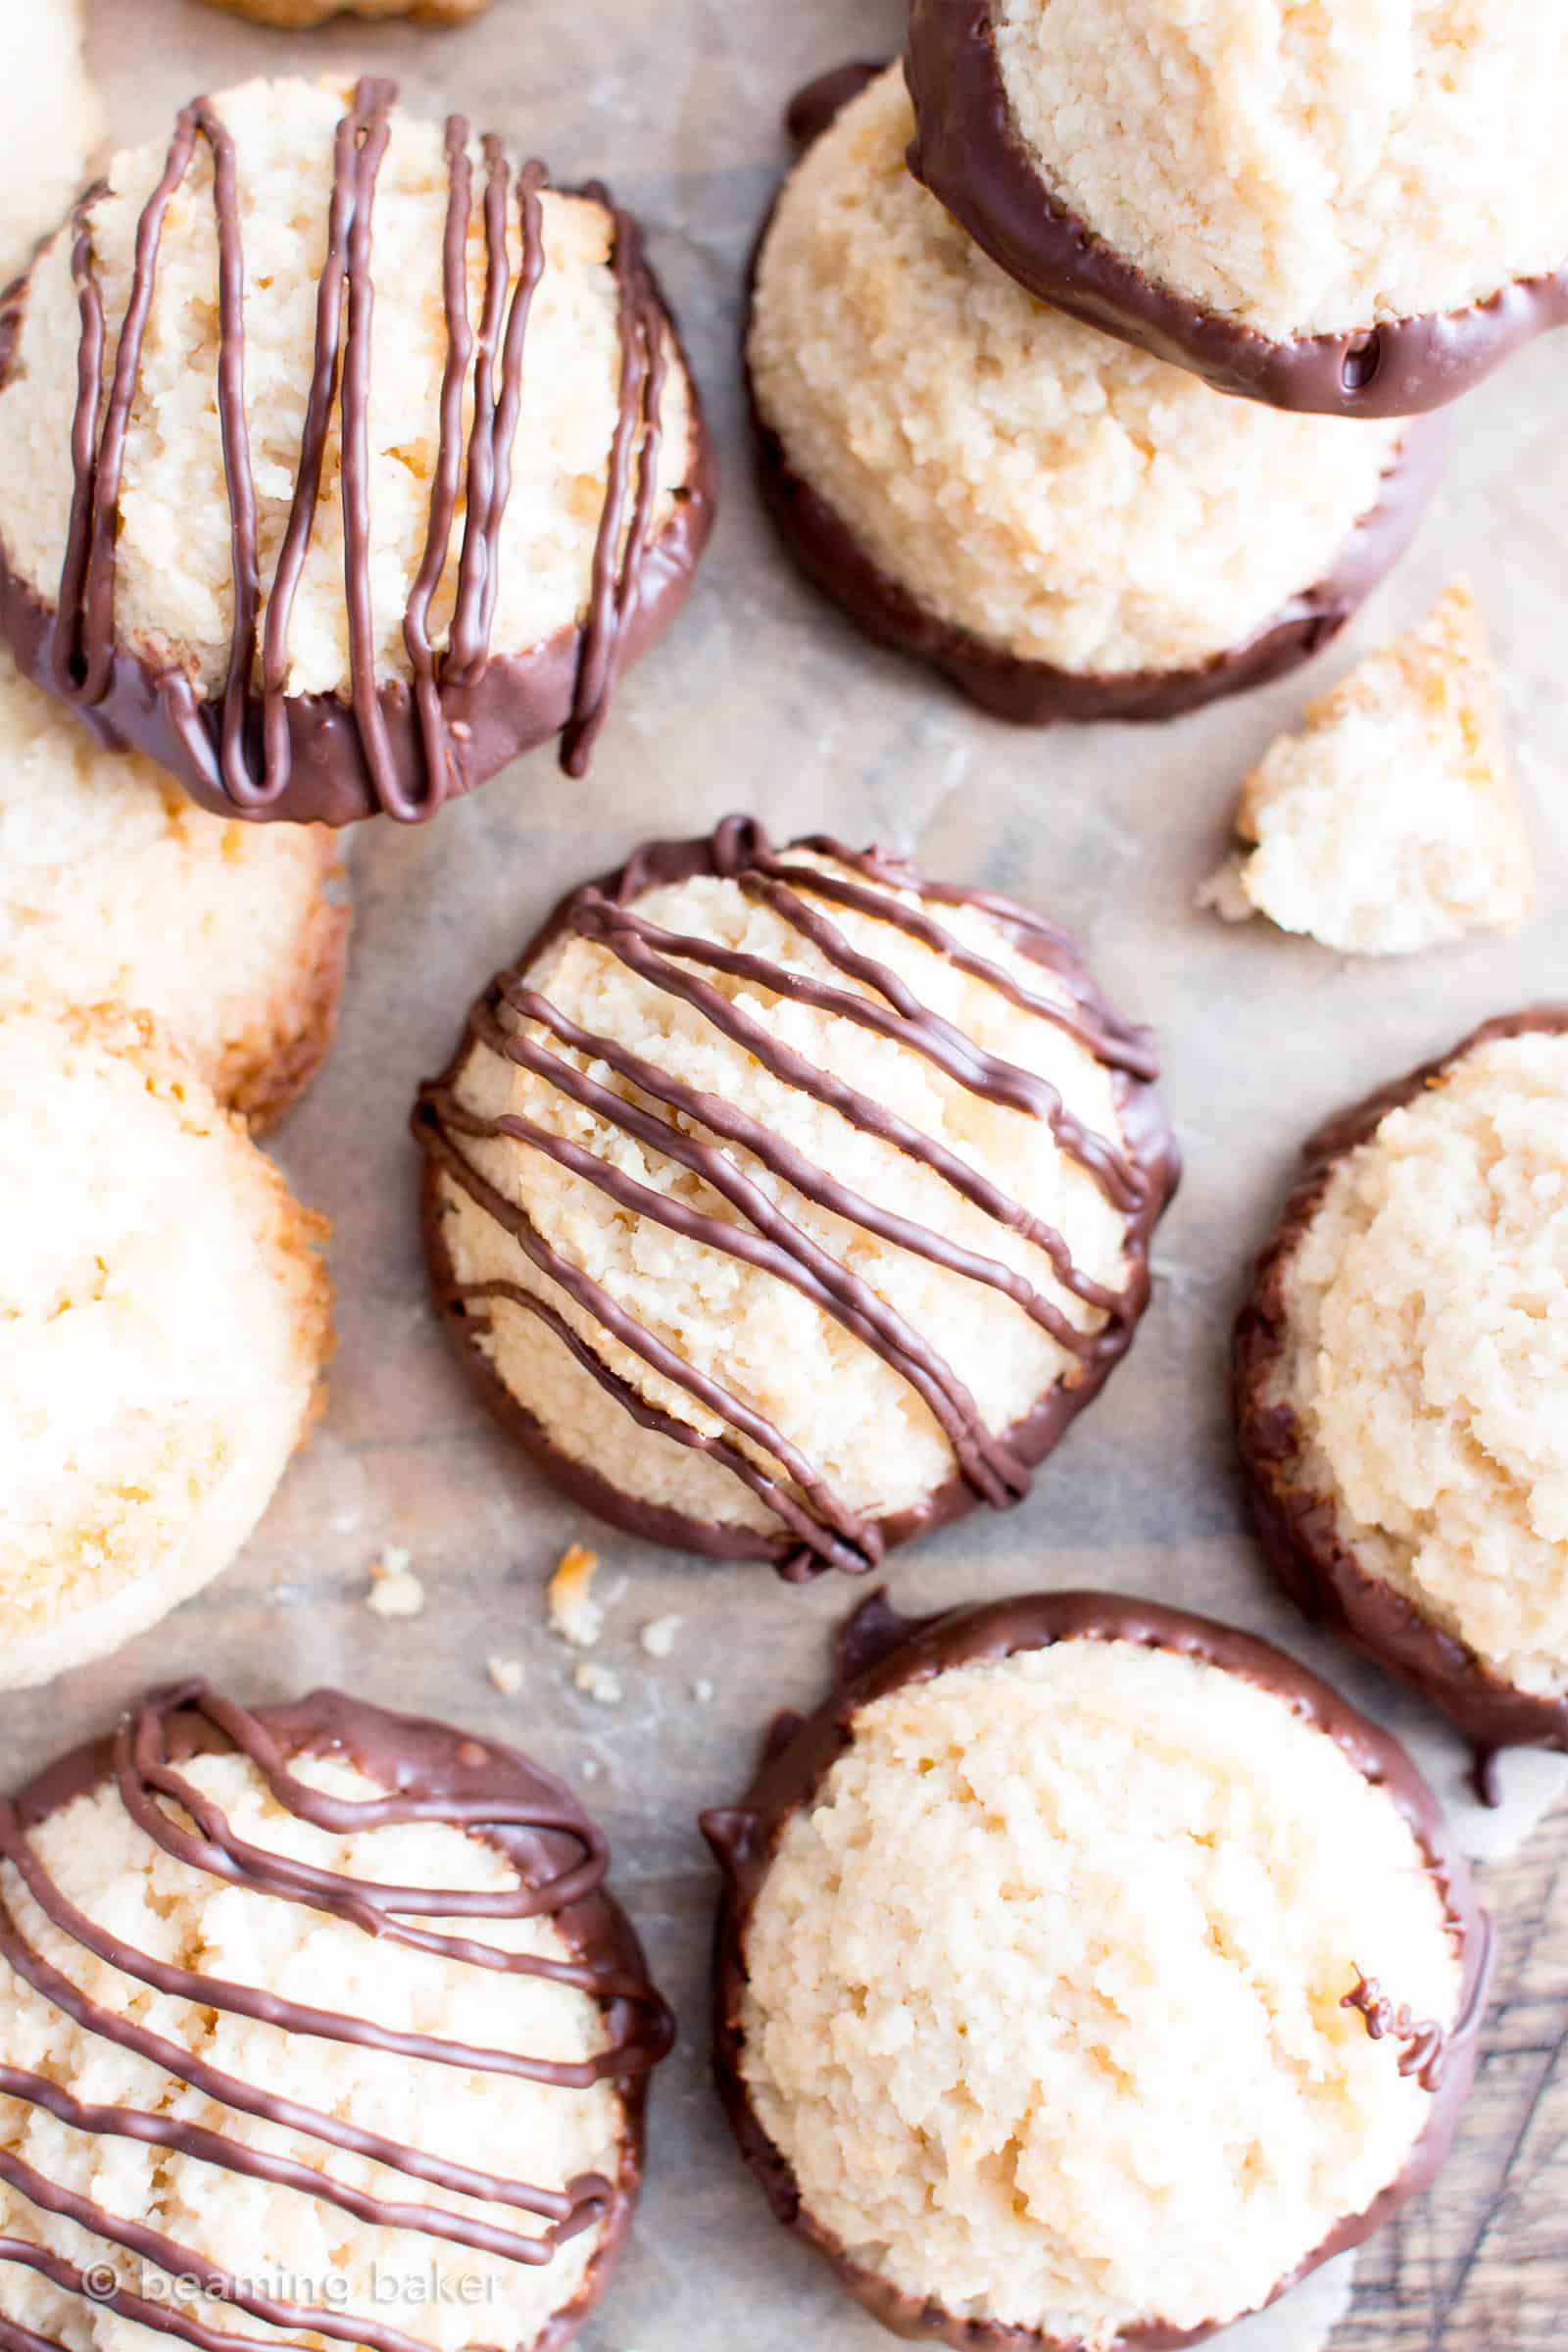 Chocolate Dipped Vegan Coconut Macaroons Recipe (V, GF): an easy recipe for chewy and satisfying chocolate-dipped coconut macaroons made with whole ingredients! #Vegan #Paleo #GlutenFree #DairyFree #Cookies #Dessert | Recipe on BeamingBaker.com